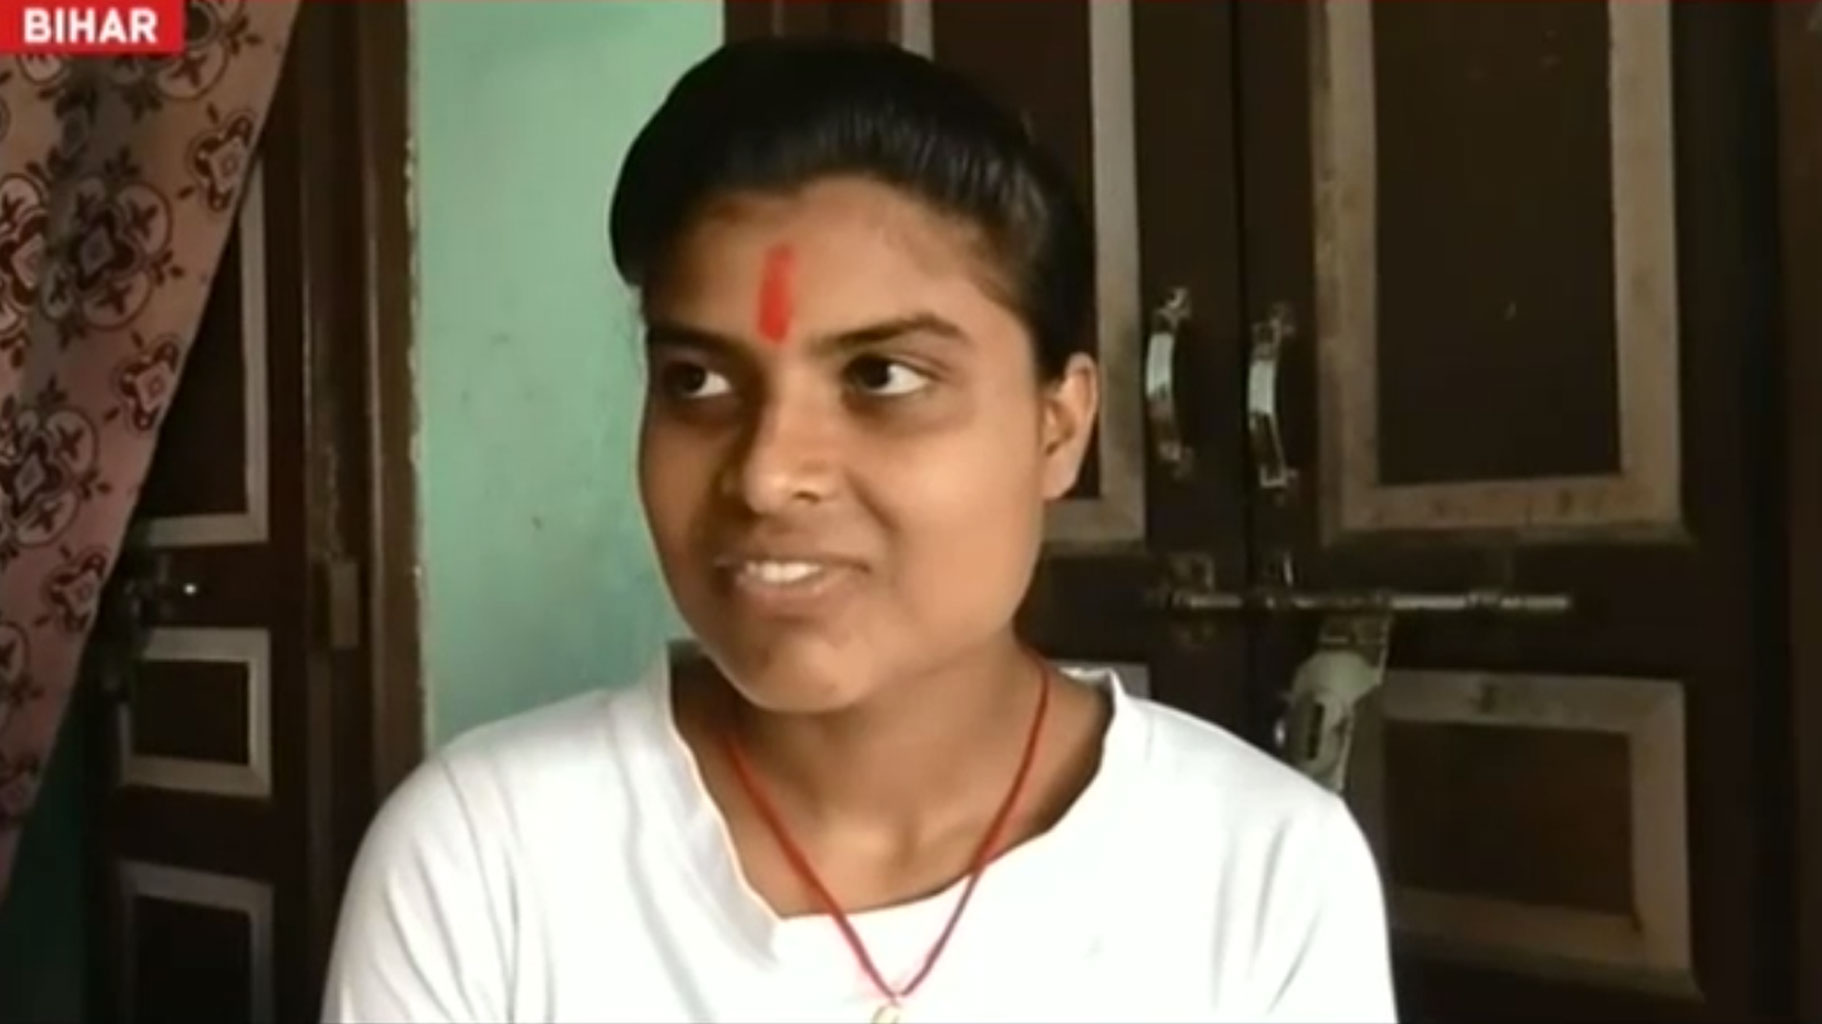 Bihar S Topper Ruby Rai Says Told Papa To Get Me Passed But They Made Me Top